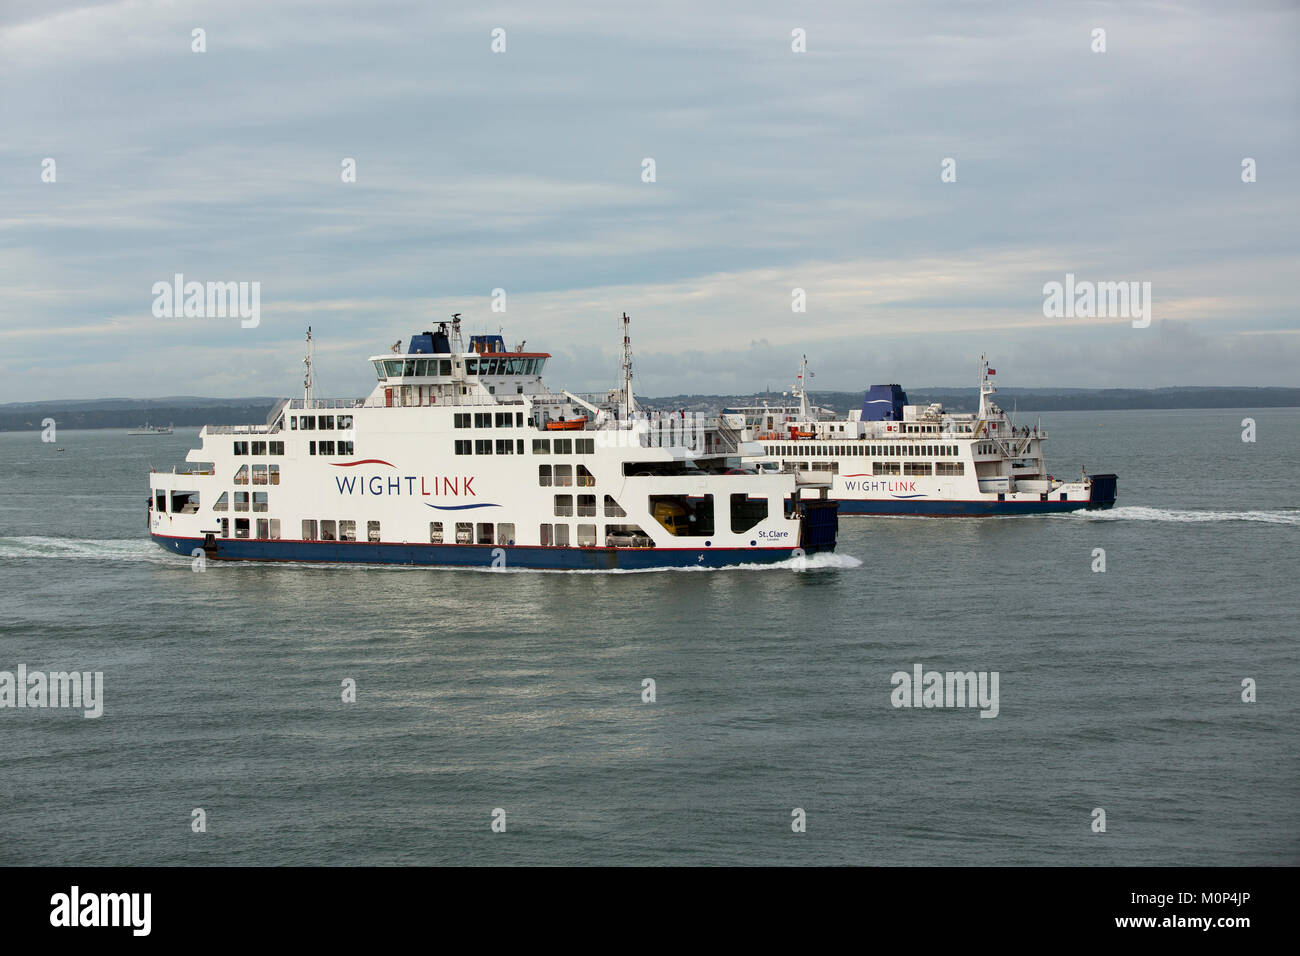 Wightlink car ferries St Faith and St Clare passing each other in the Solent. Inbound and outbound services of two generations of ferry. Stock Photo